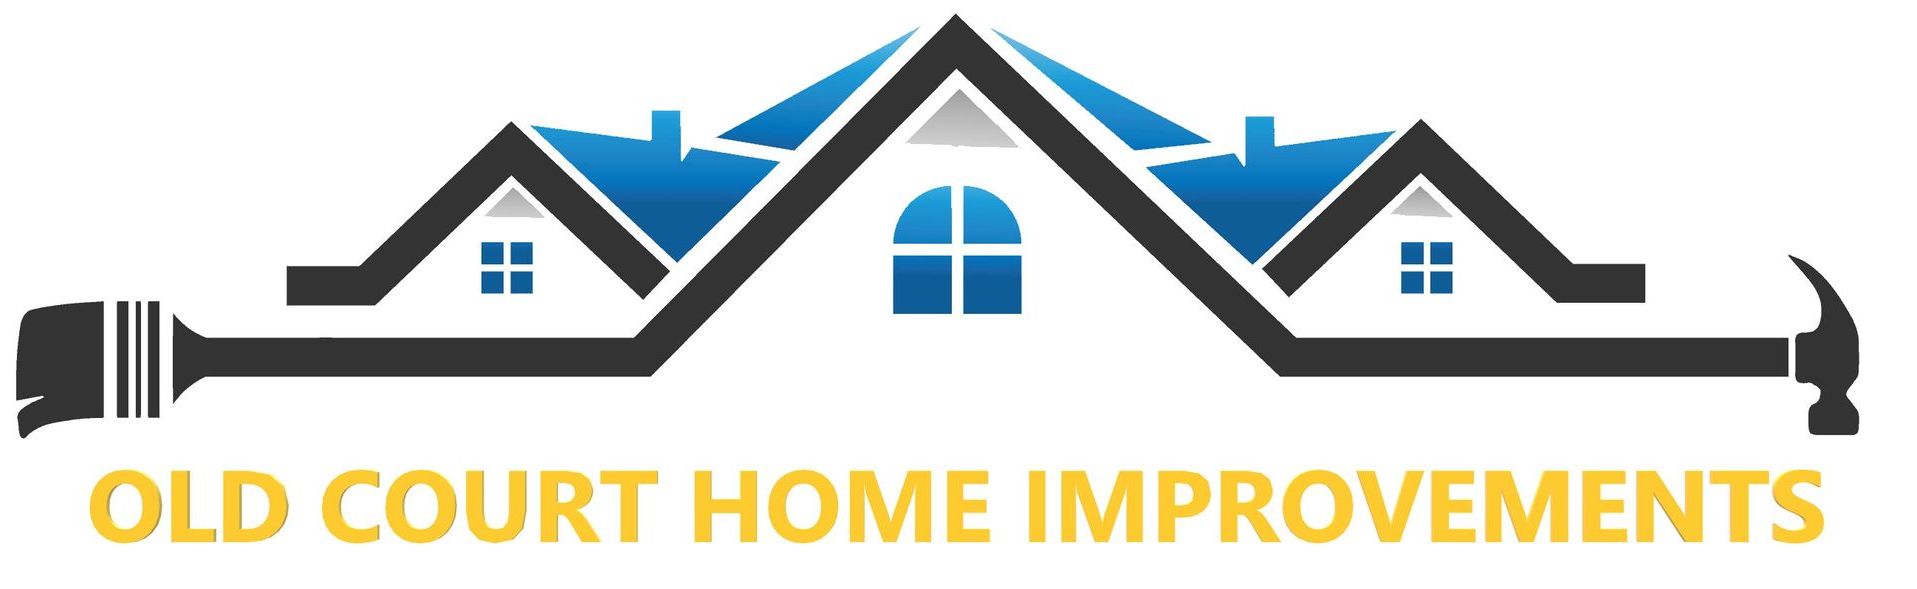 a logo for old court home improvements shows a house and a hammer .